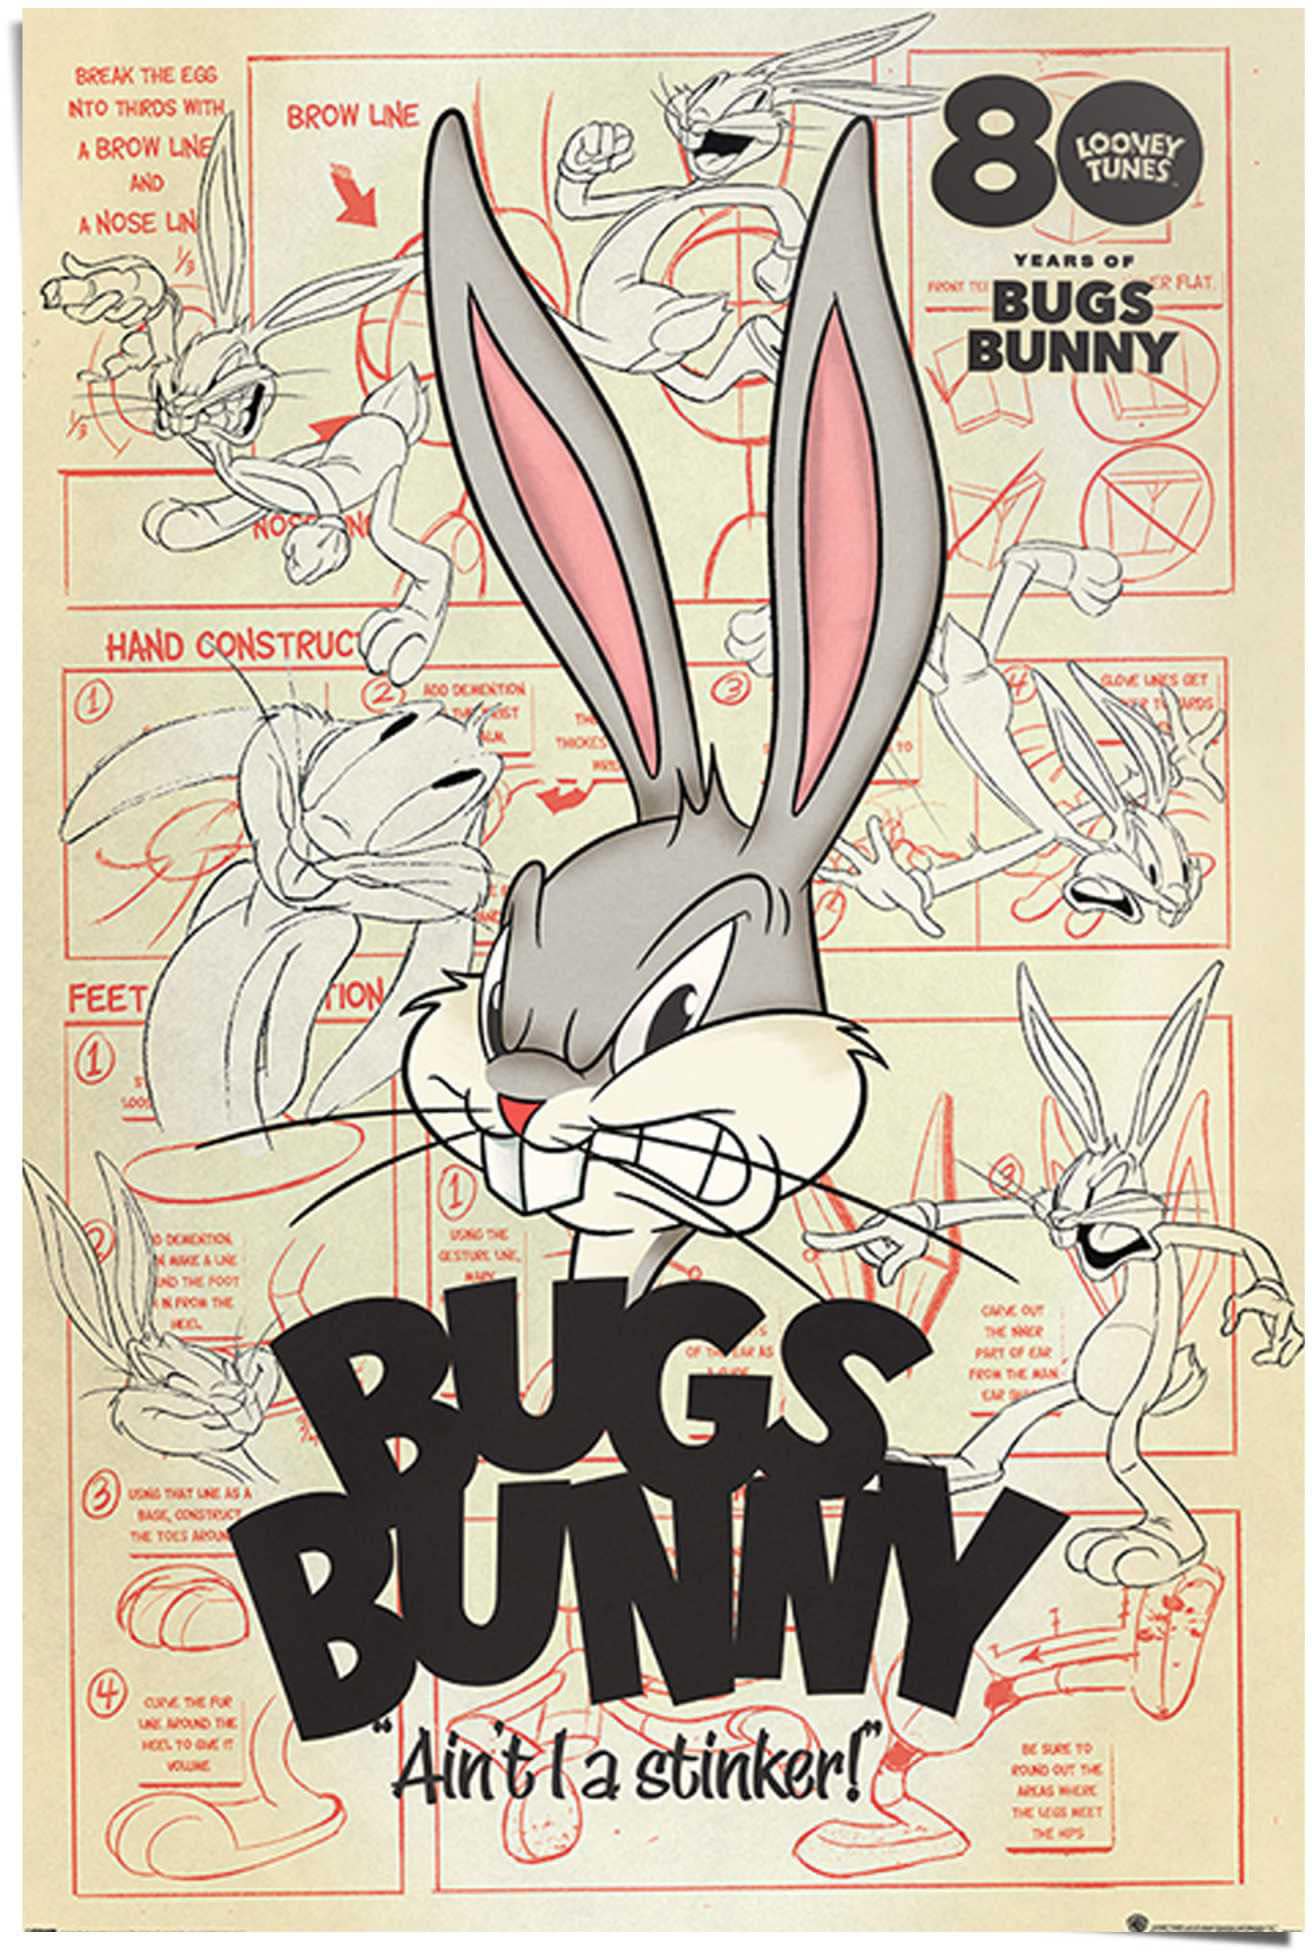 Reinders! I Bros - kaufen St.) Tunes stinker bequem Hase«, - Bunny »Bugs ait Looney (1 Poster Warner a